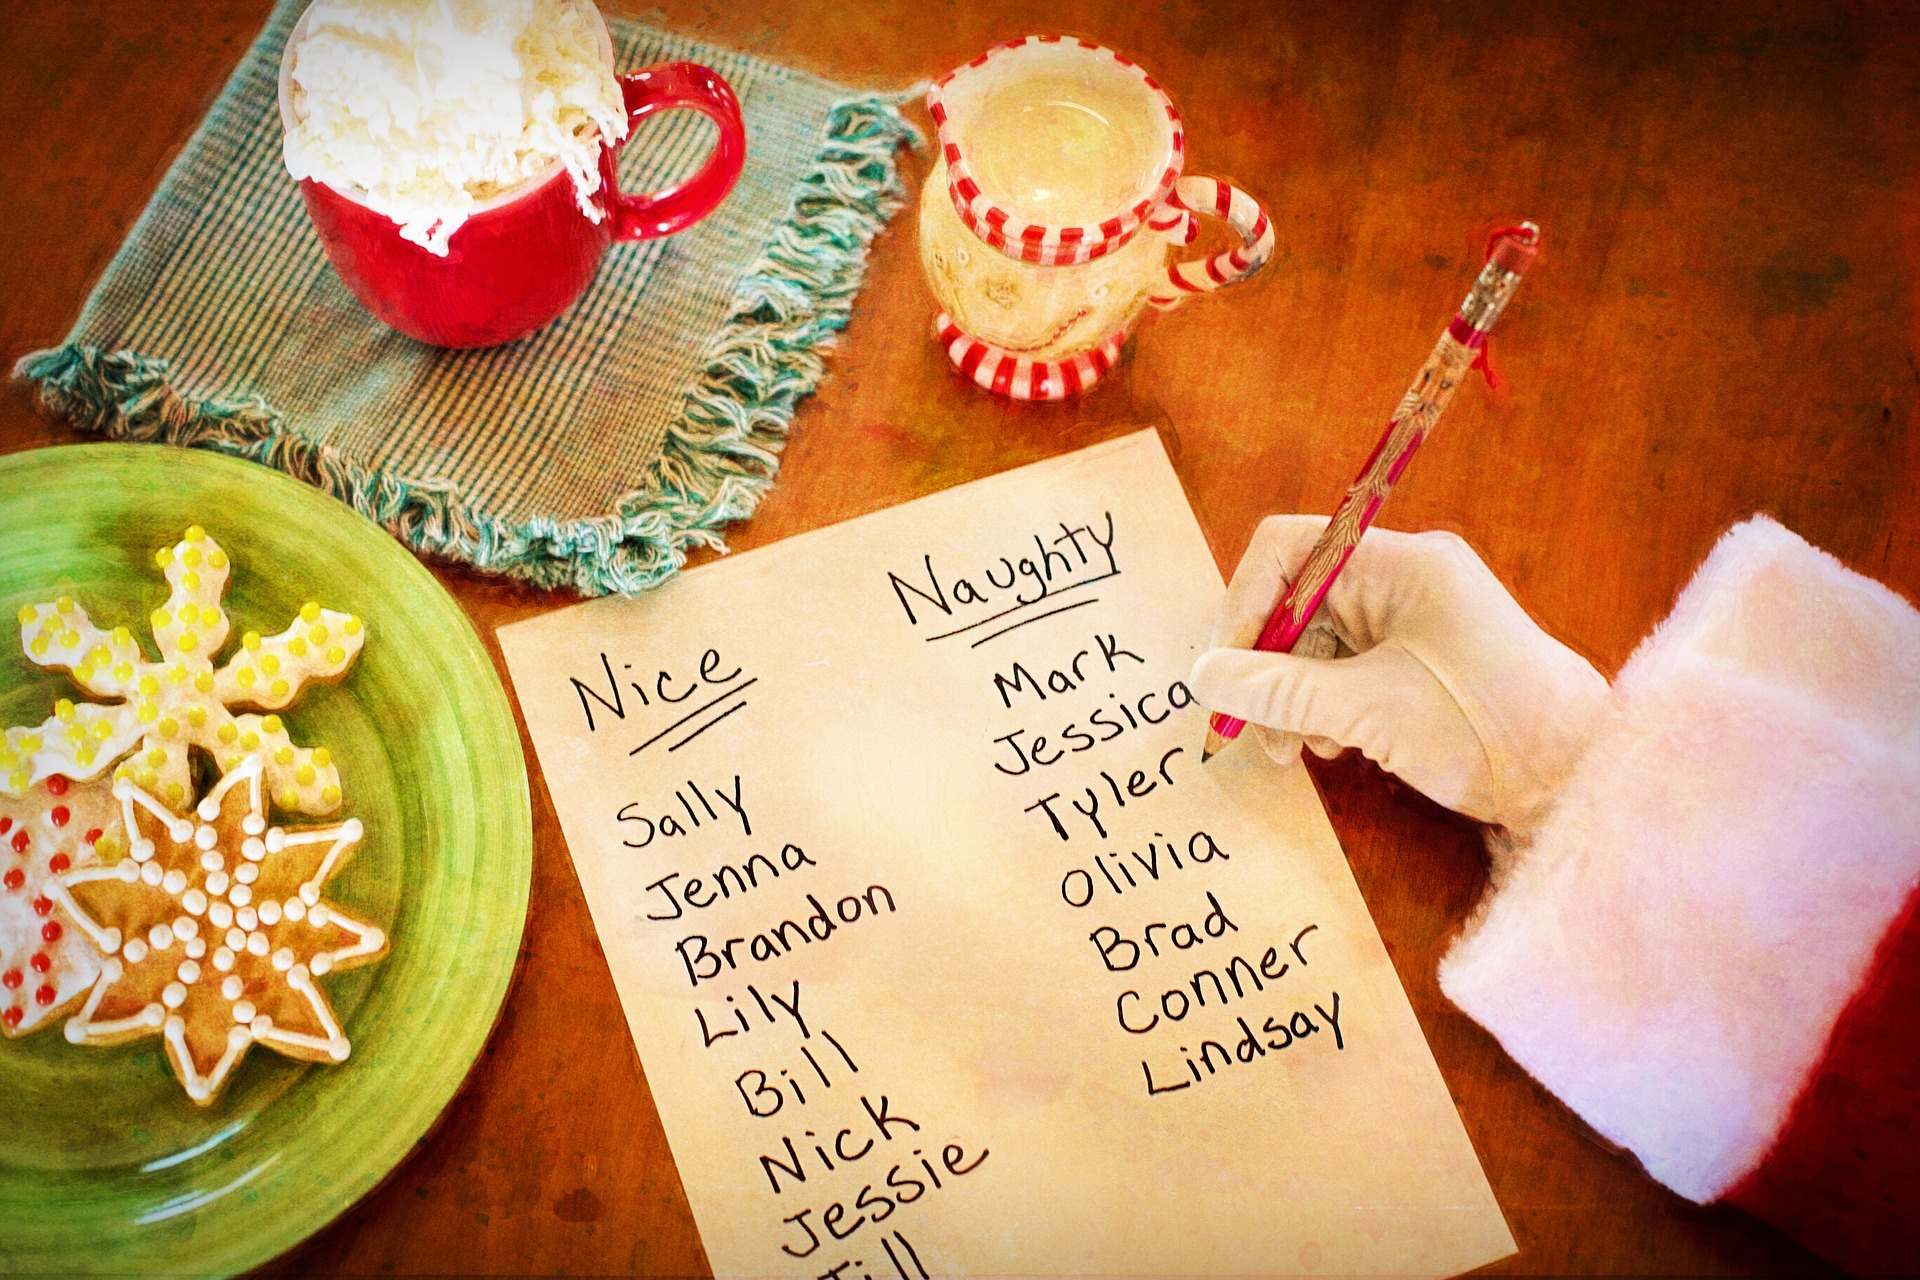 Want to Make It on to Our Nice List?